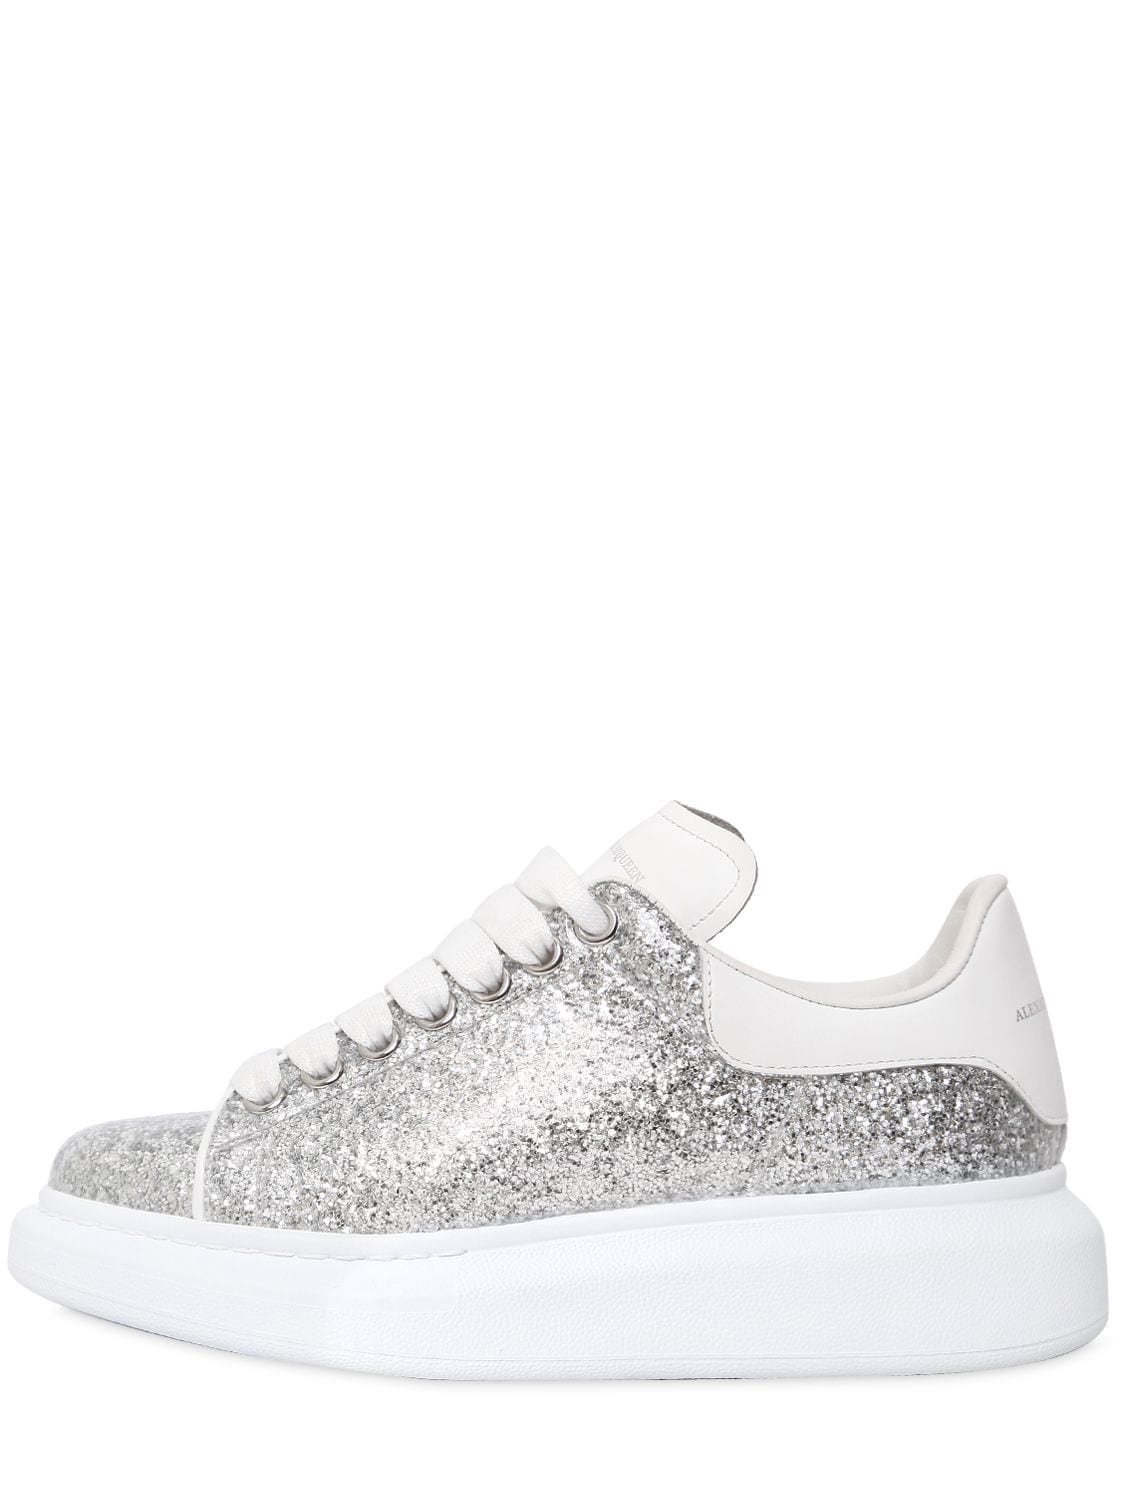 ALEXANDER MCQUEEN 40MM COATED GLITTER & LEATHER SNEAKERS,67IA8F002-ODExMw2